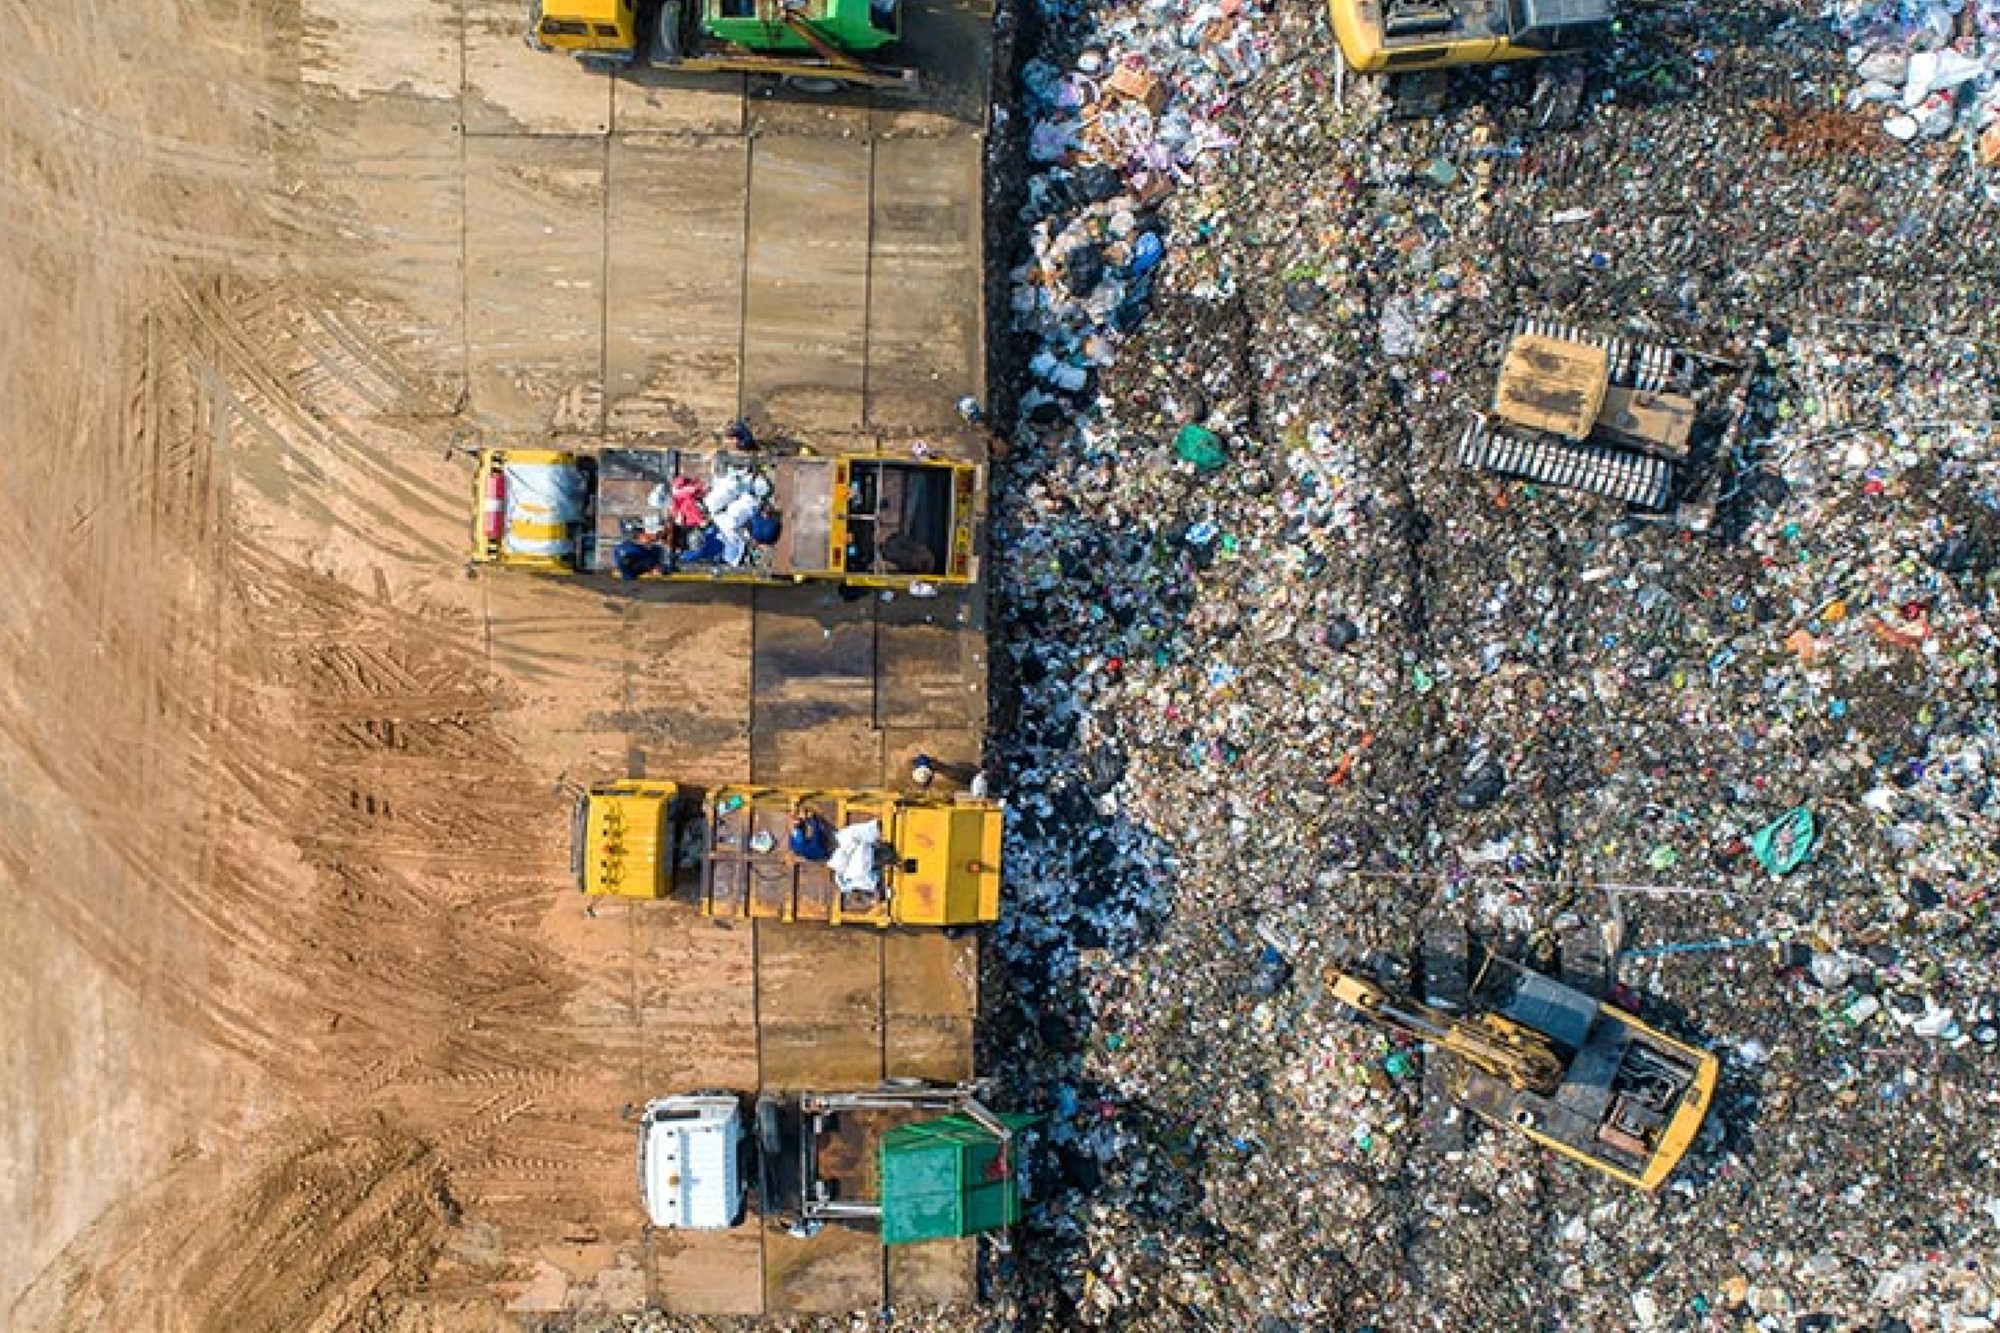 VishnuSurya Projects and Infra Limited (VSIL), a prominent player in India's construction and infrastructure sector, has made a significant stride by venturing into the waste management domain through strategic collaborations.